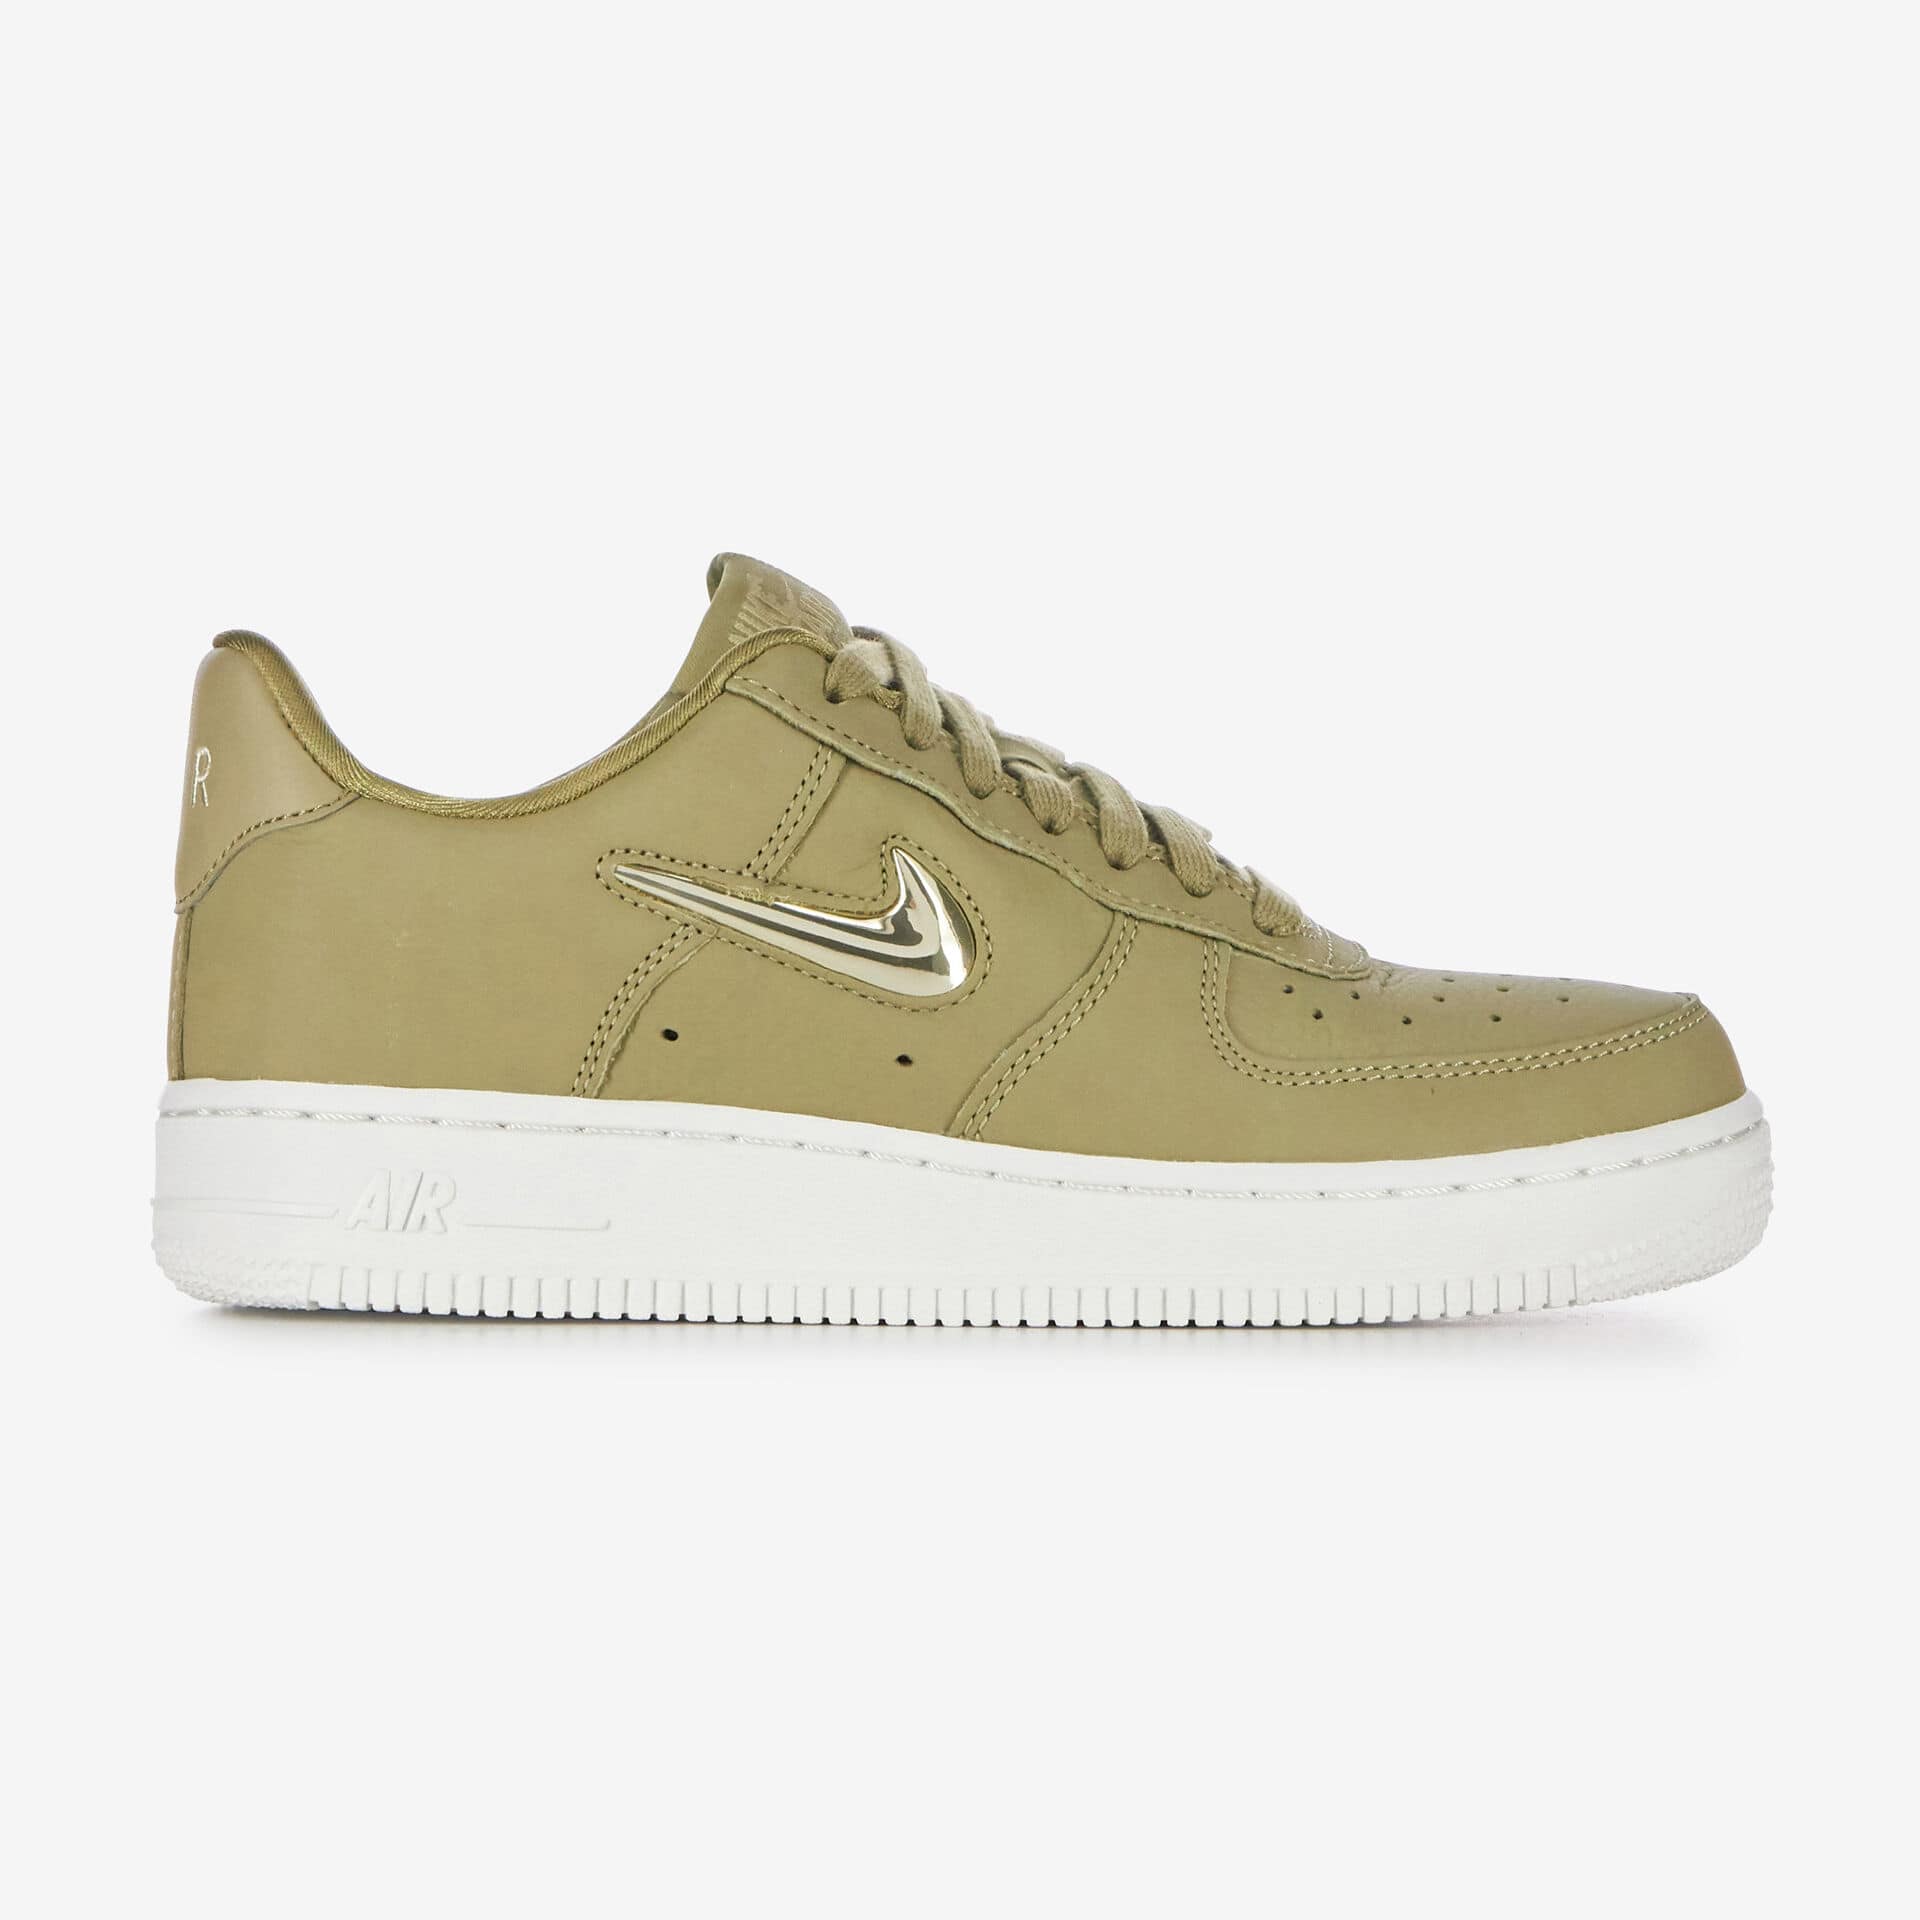 NIKE AIR FORCE 1 LOW LX. FEMME